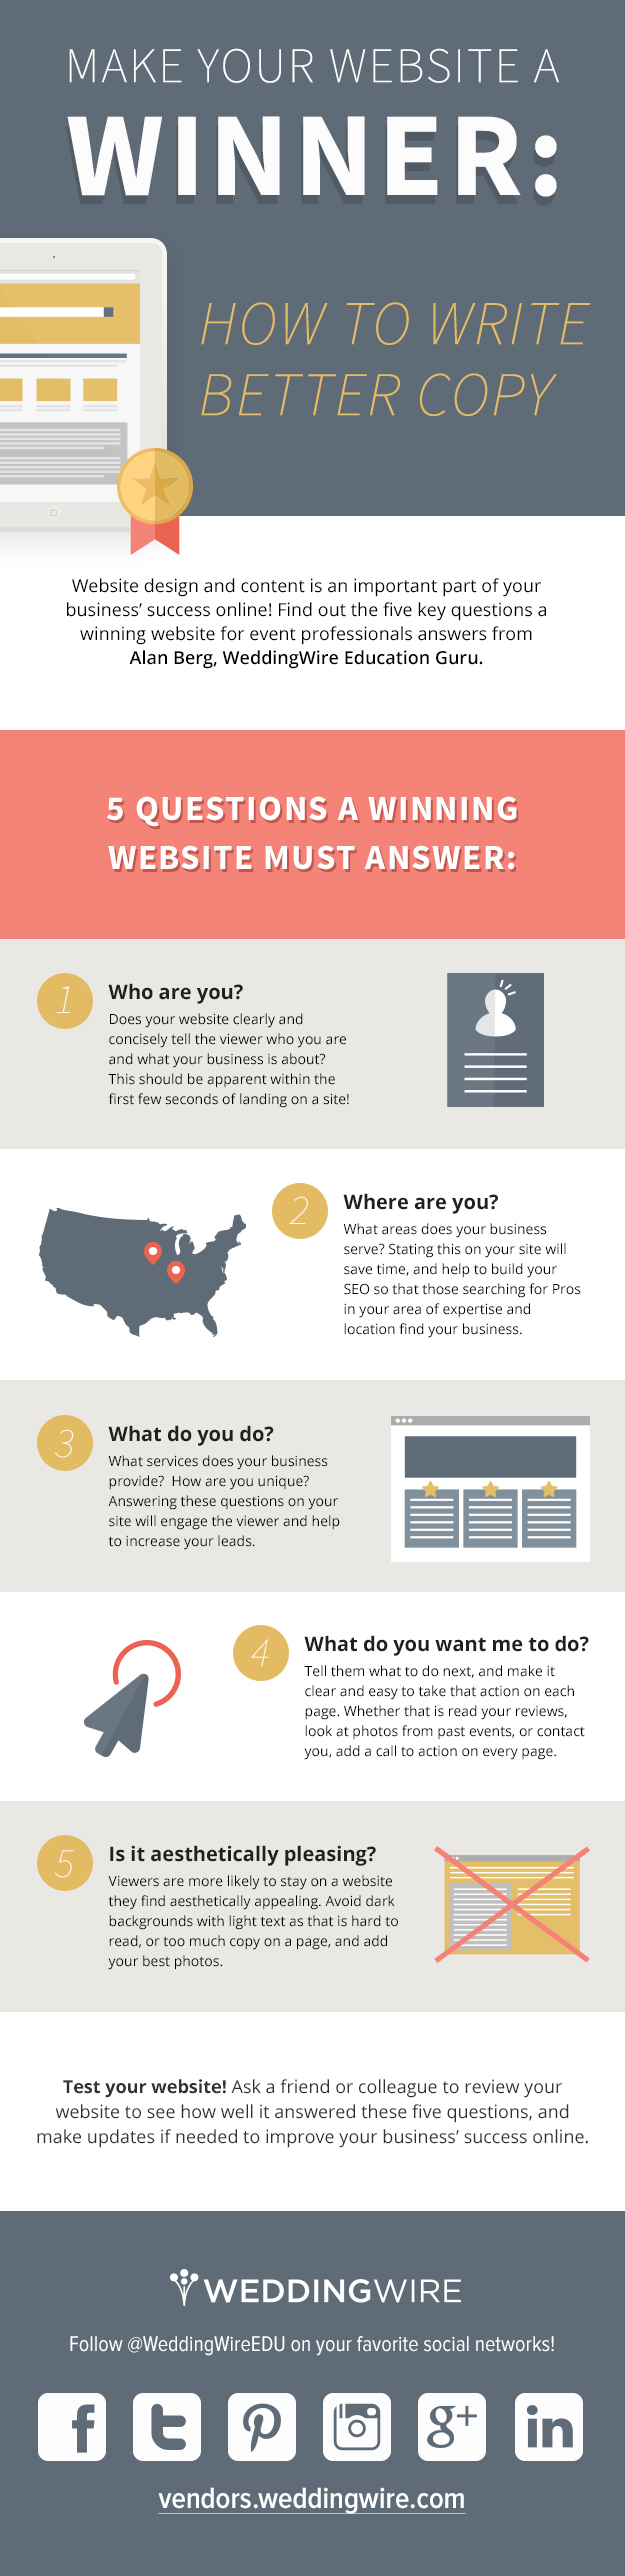 5 Questions a Winning Website Must Answer - infographic